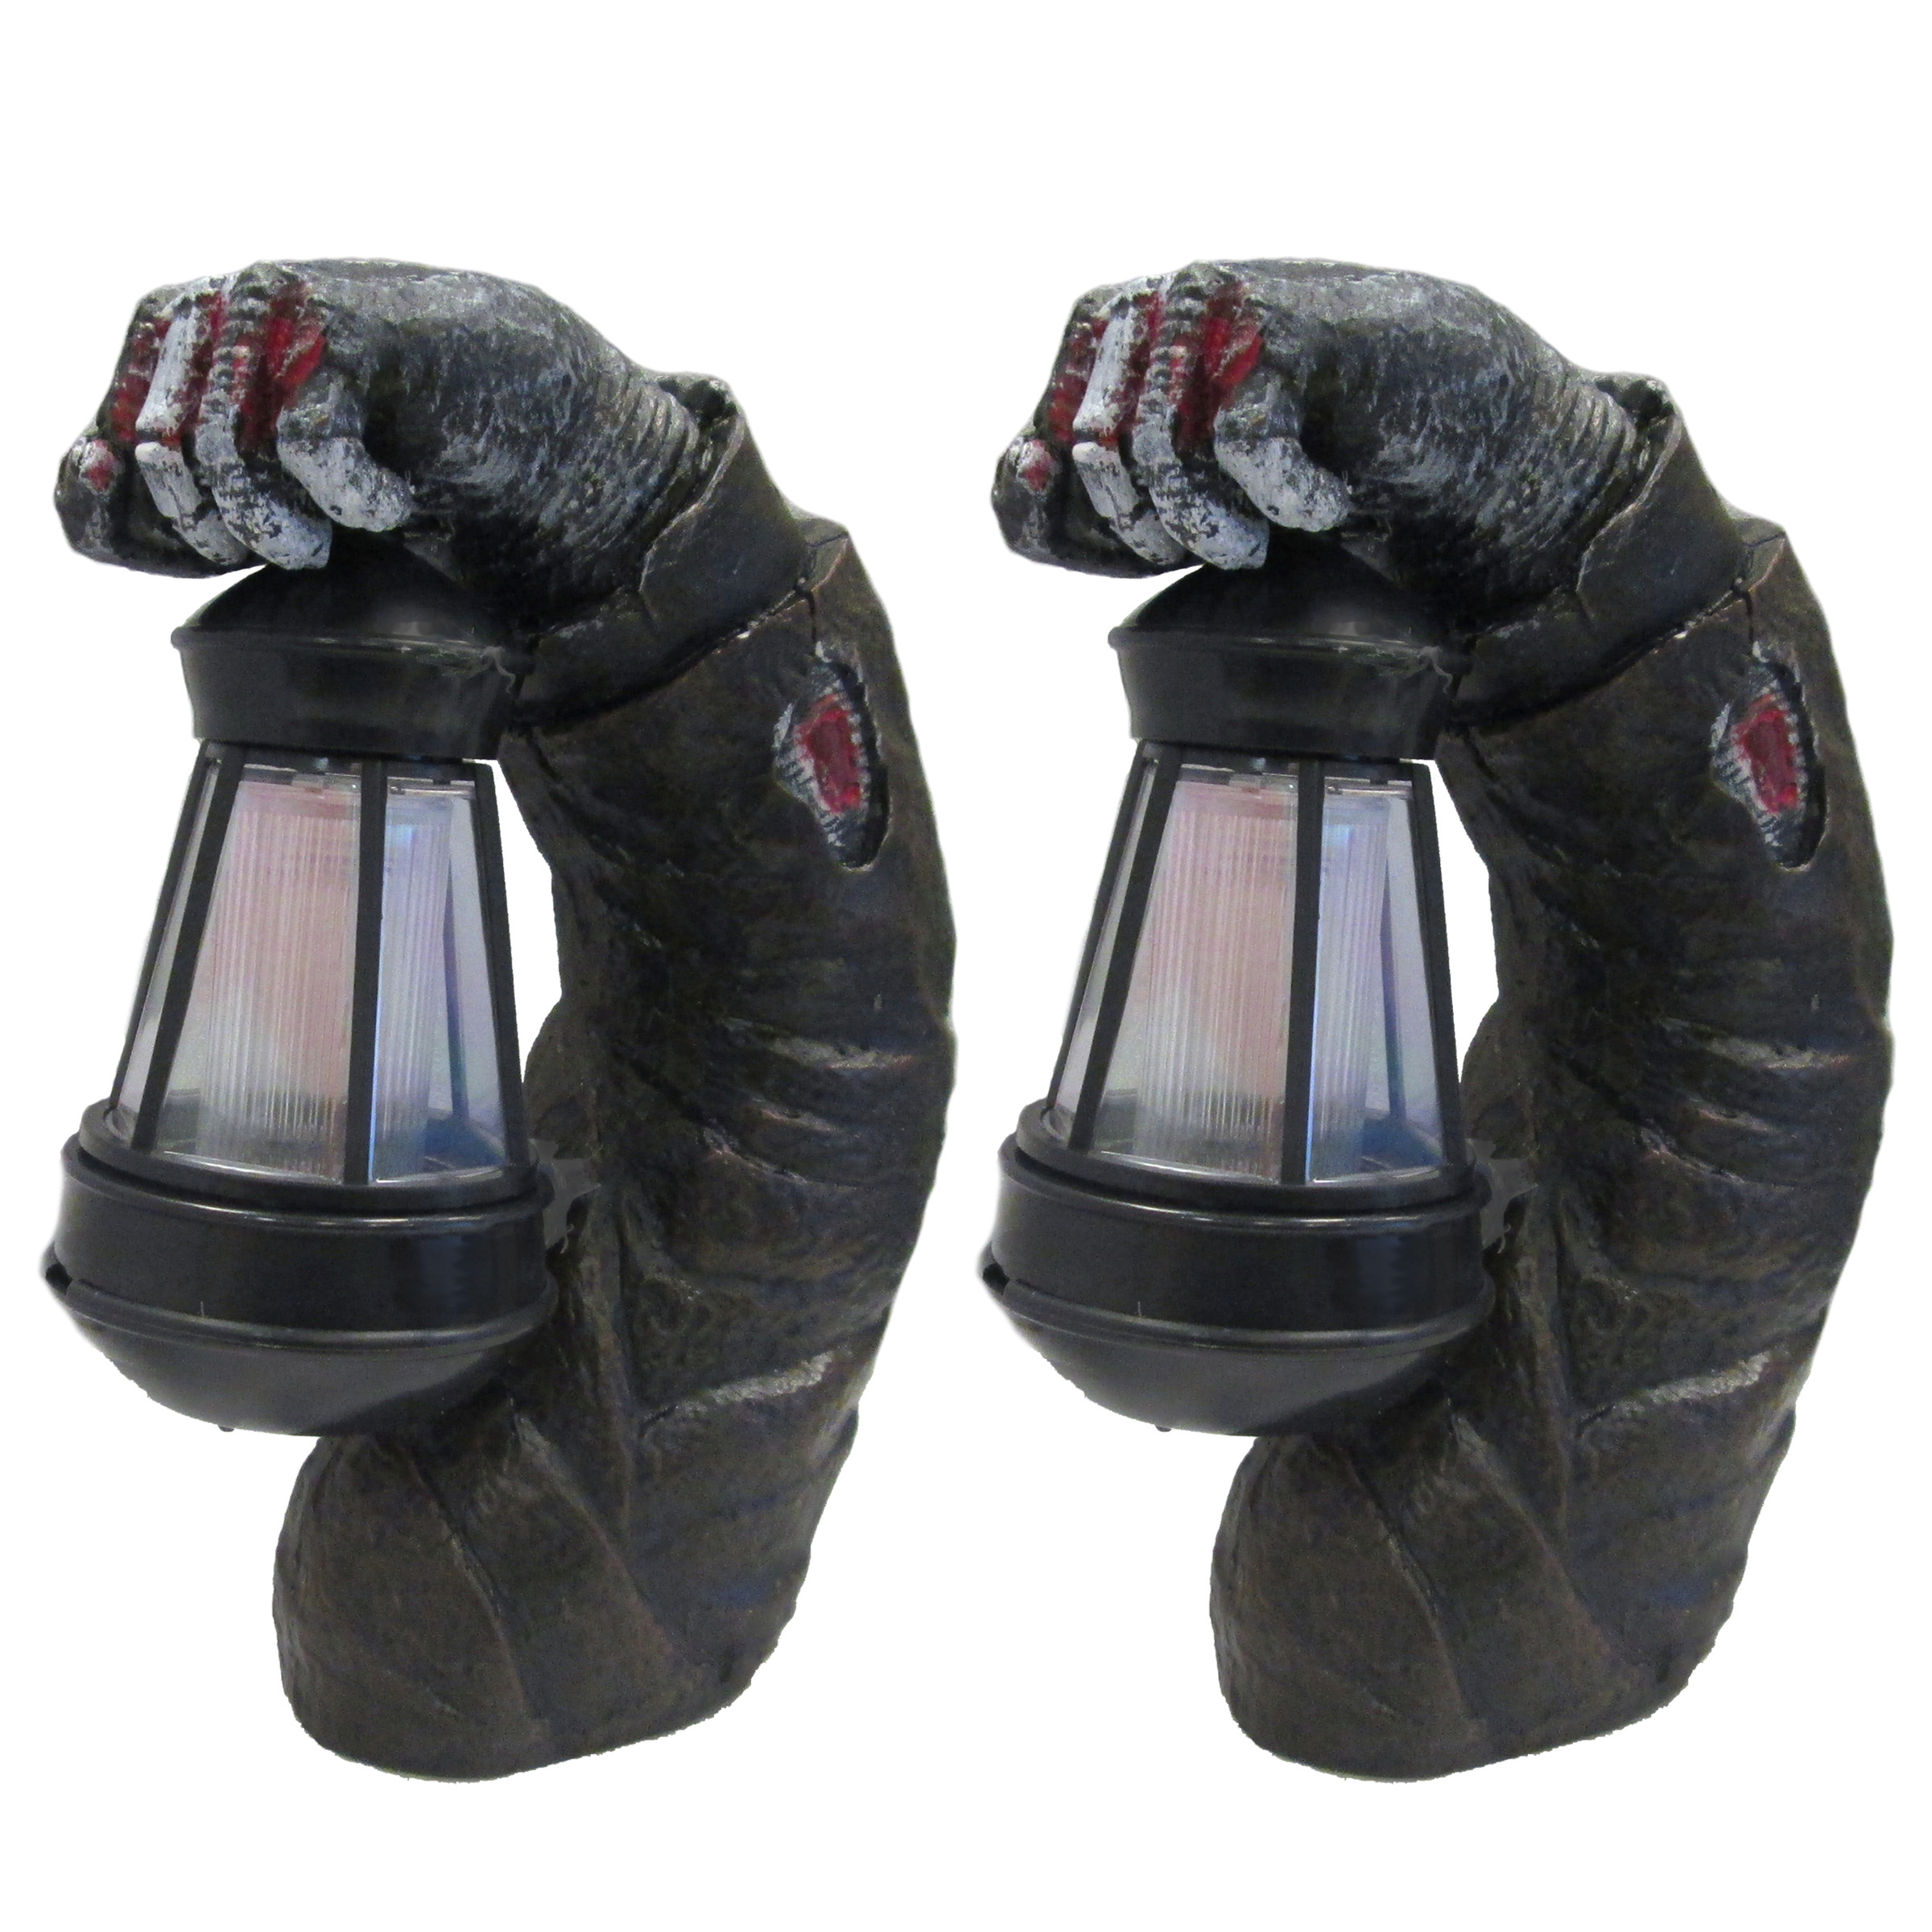 Halloween Path Lights
 2 Pack Outdoor Halloween Pathway Zombie Arm with Solar